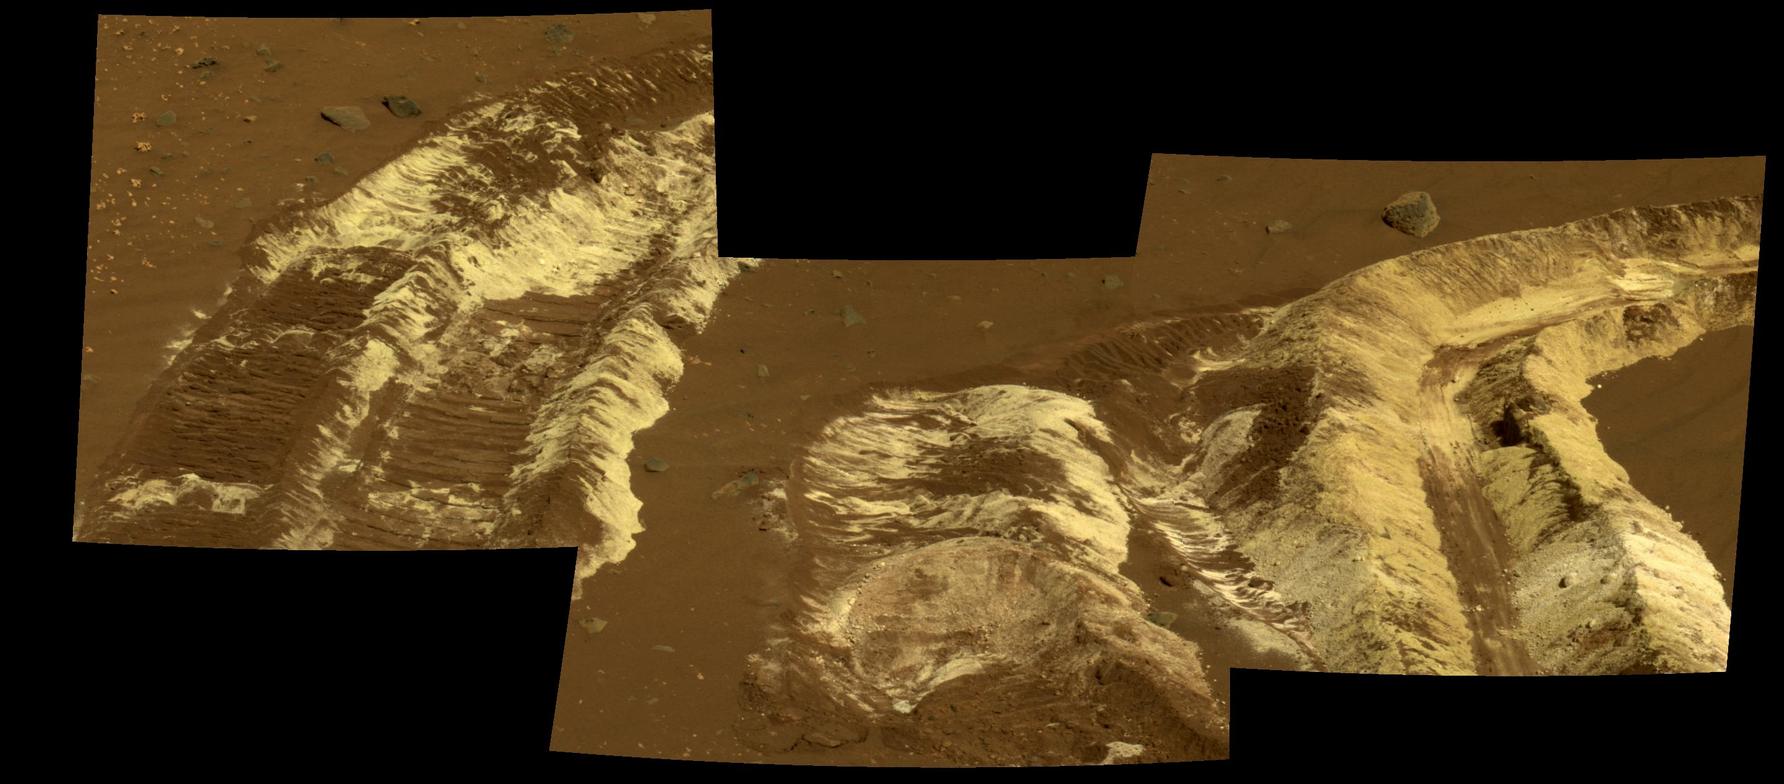 While driving eastward toward the northwestern flank of "McCool Hill," the wheels of NASA's Mars Exploration Rover Spirit churned up the largest amount of bright soil discovered so far in the mission